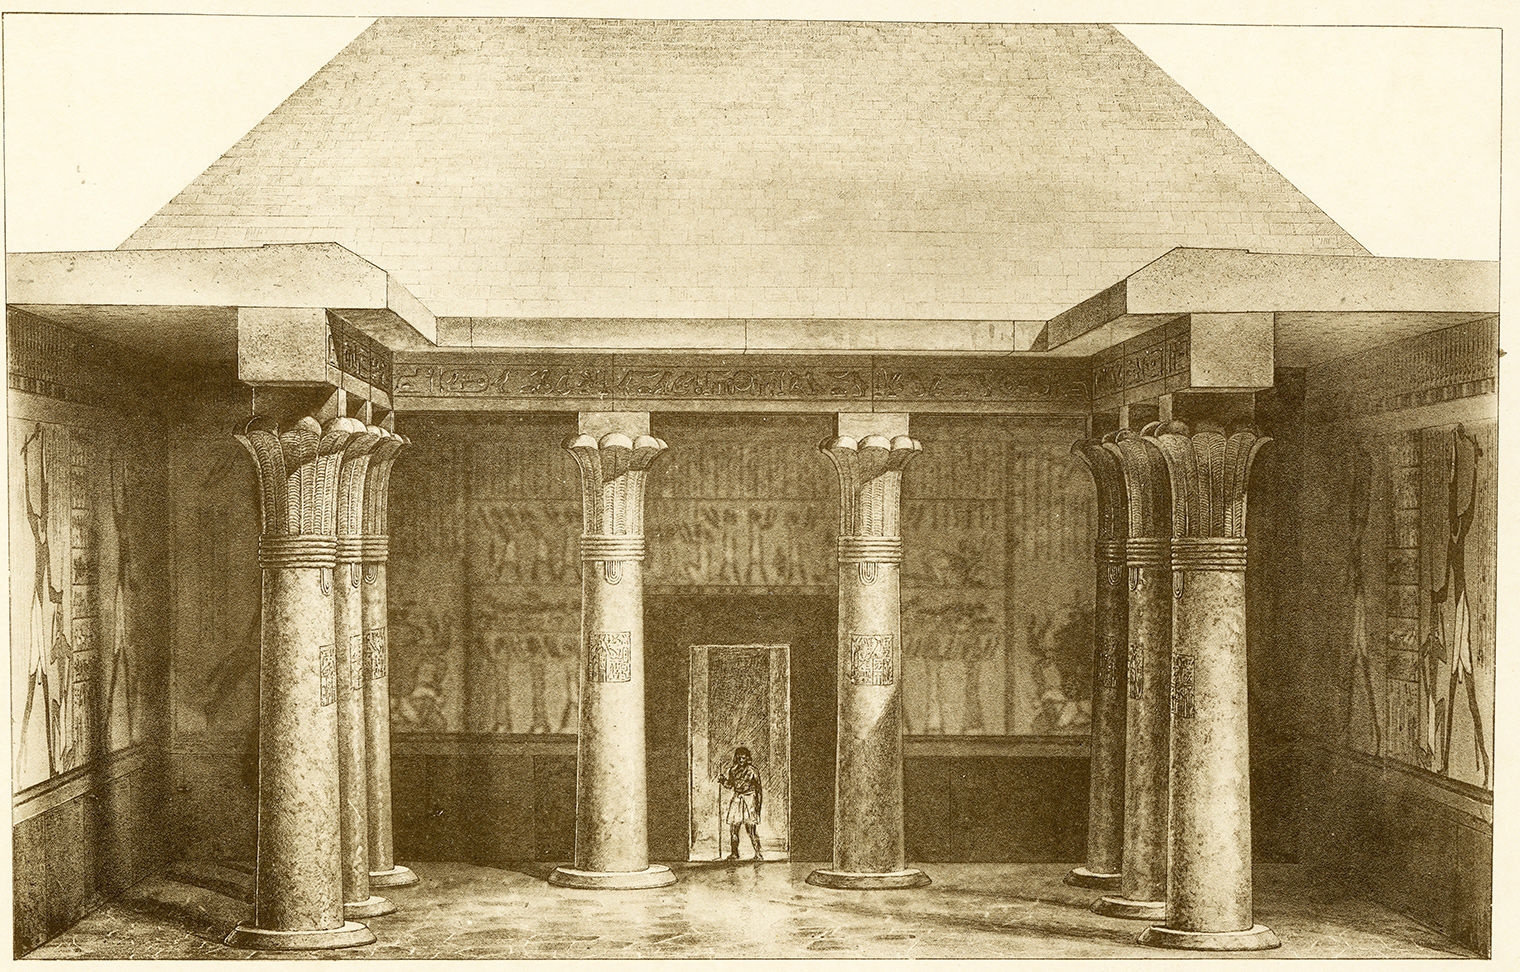 Sepia painting reconstructing the interior of a temple with columns and decorated walls, with part of a pyramid visible in the background.